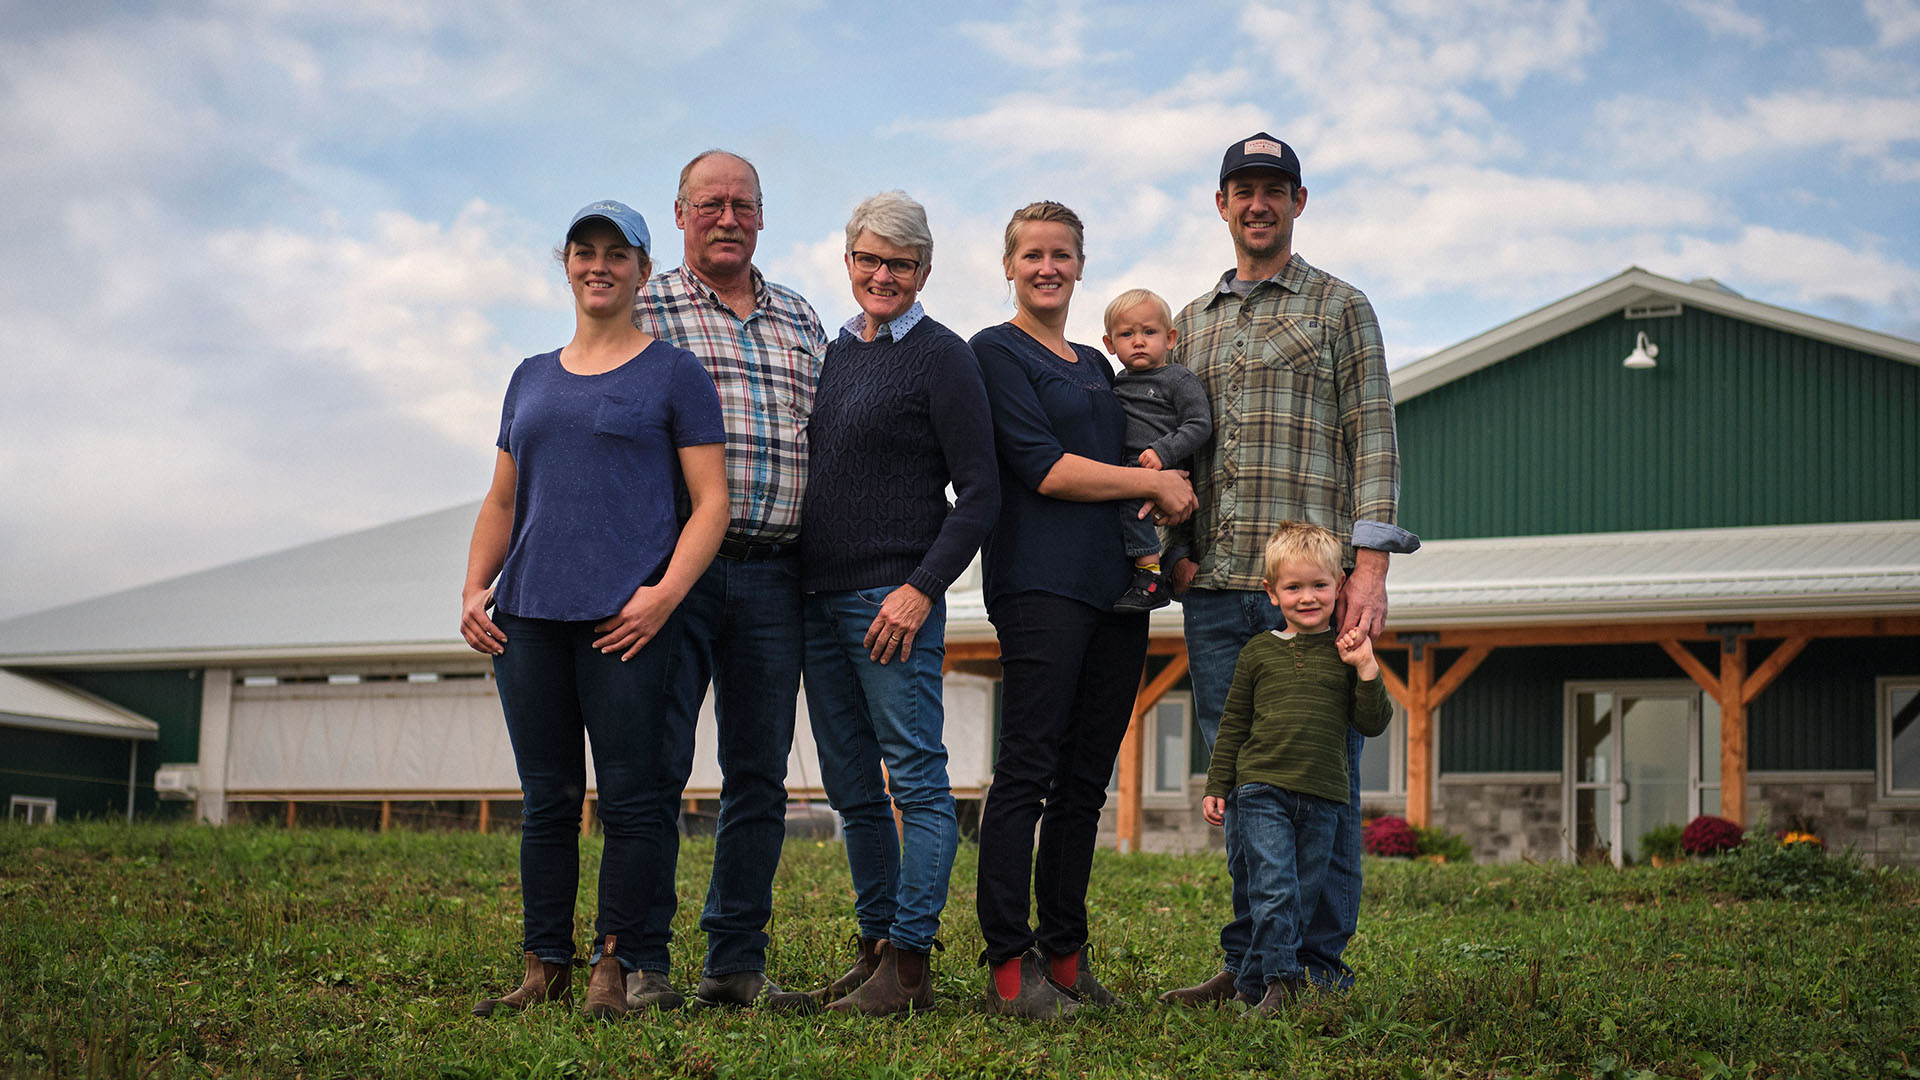 Family portrait of the Den Haans of Sheldon Creek Dairy on their family farm.